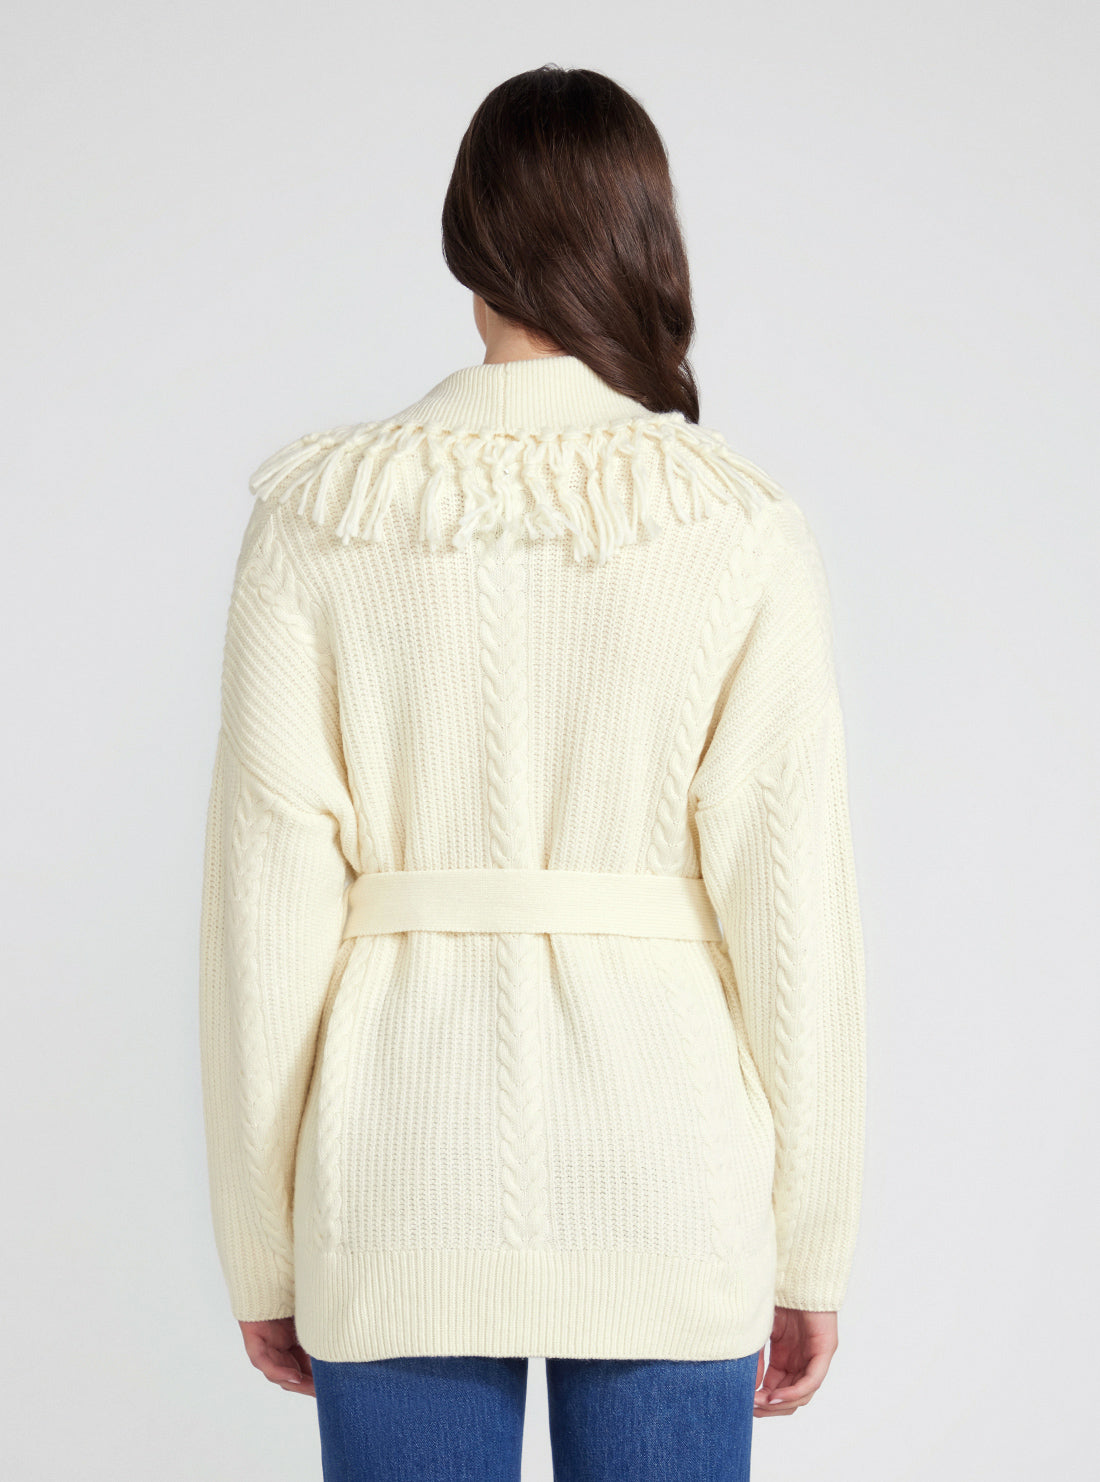 GUESS Cream White Long Sleeve Cardigan Sweater back view